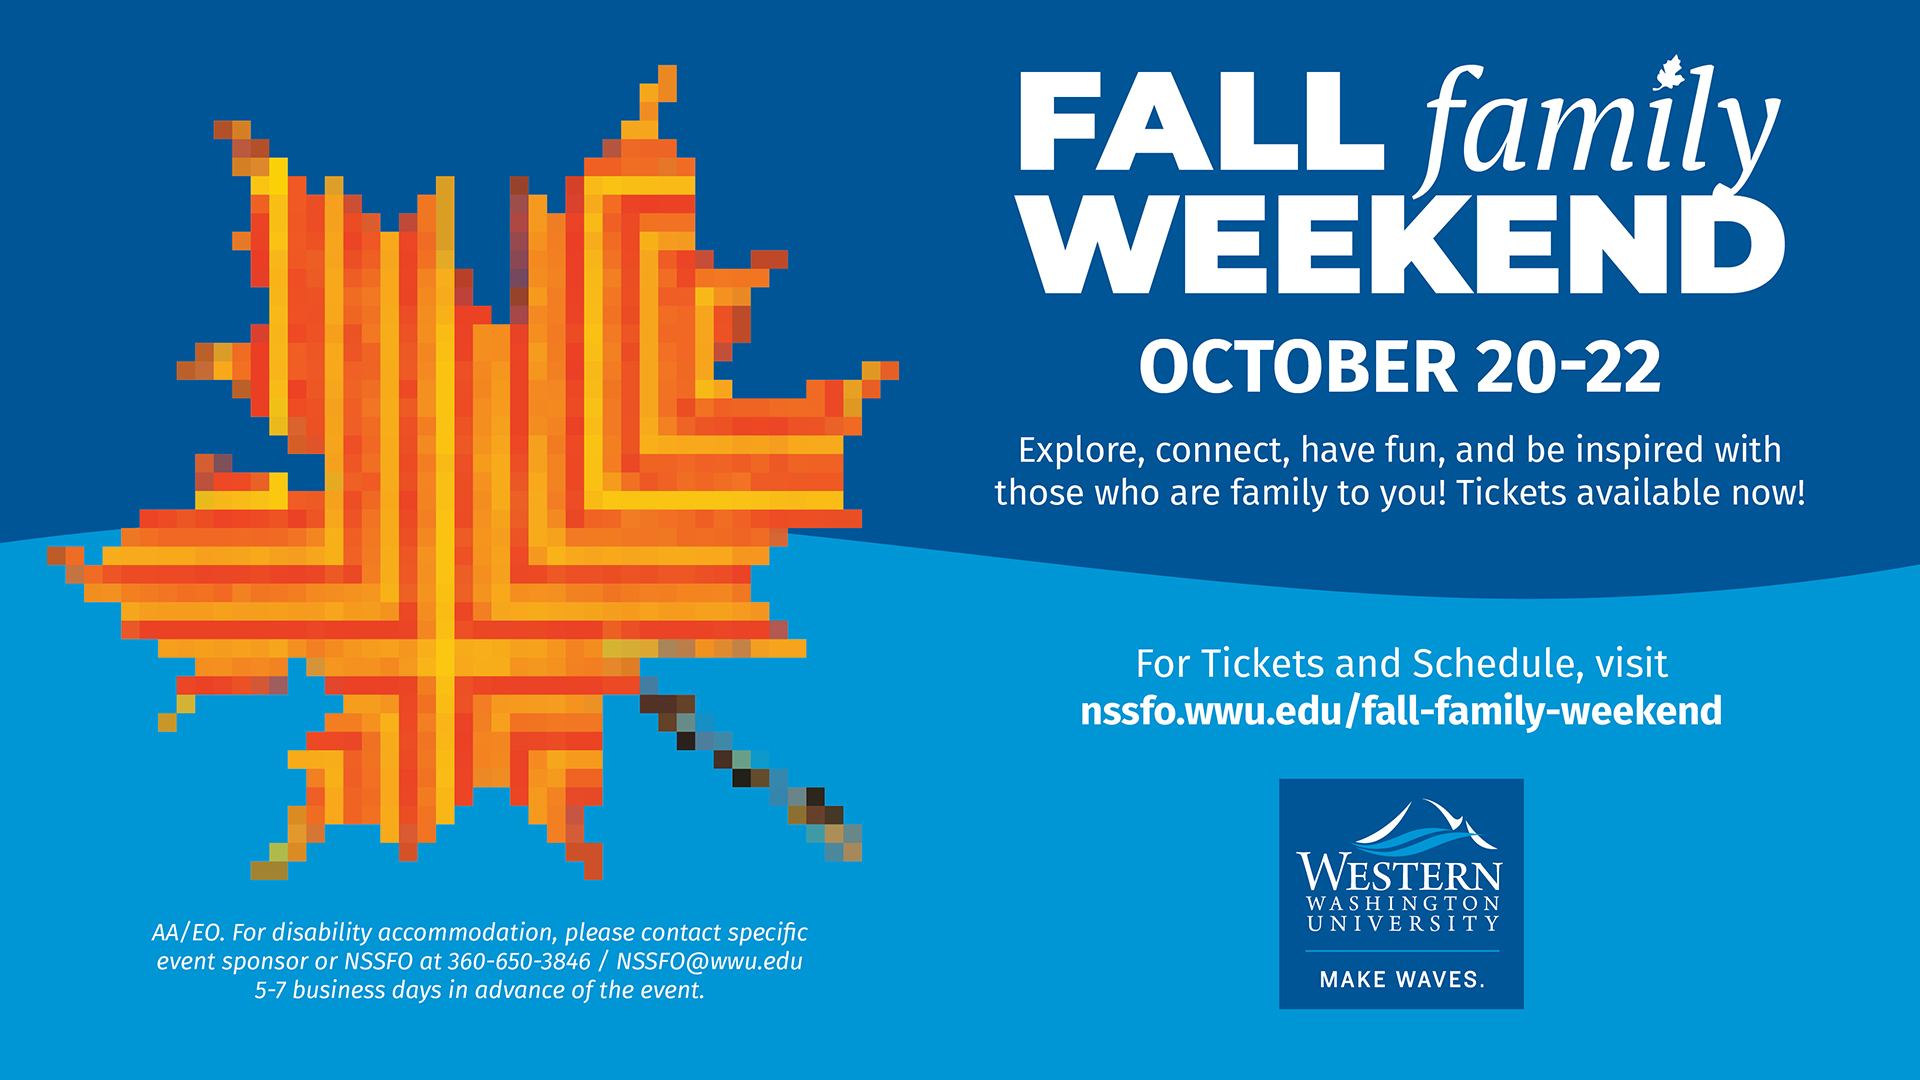 Orange leaf on blue background with Fall Family Weekend event October 20-22, 2023